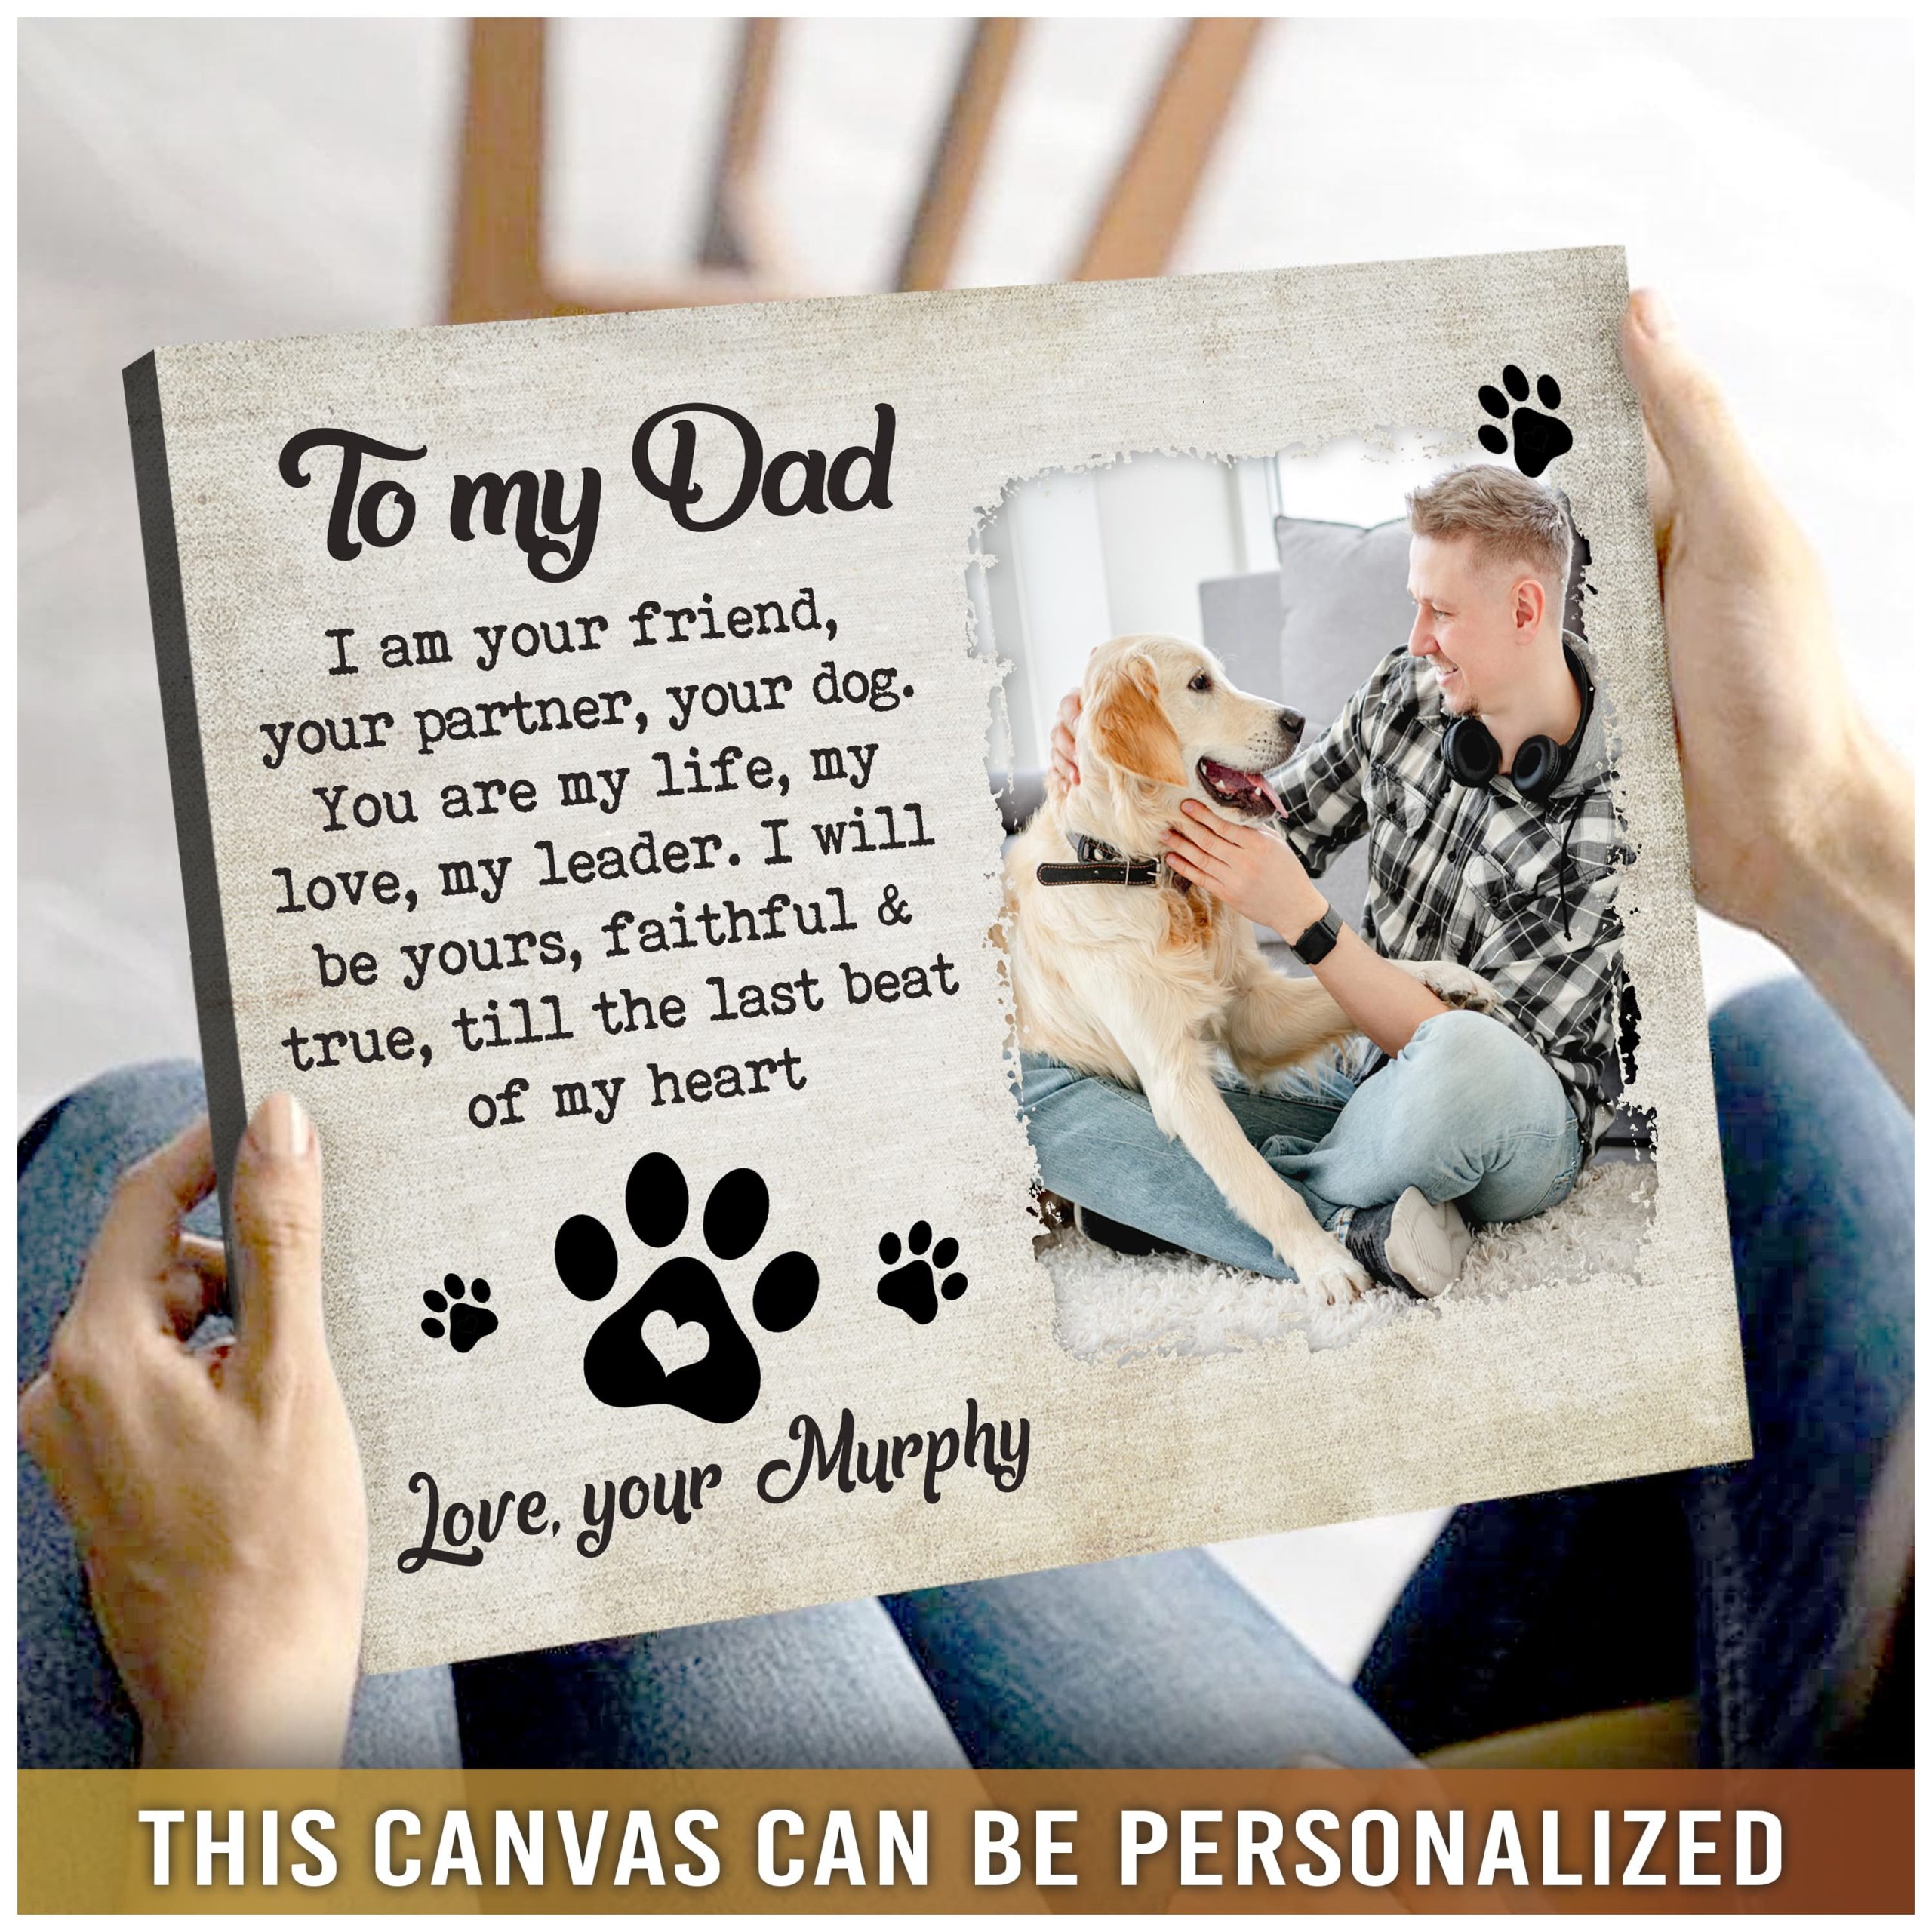 https://images.ohcanvas.com/ohcanvas_com/2022/05/17003729/fathers-day-gift-ideas-personalized-gift-for-dog-dad-canvas-print01-scaled.jpg